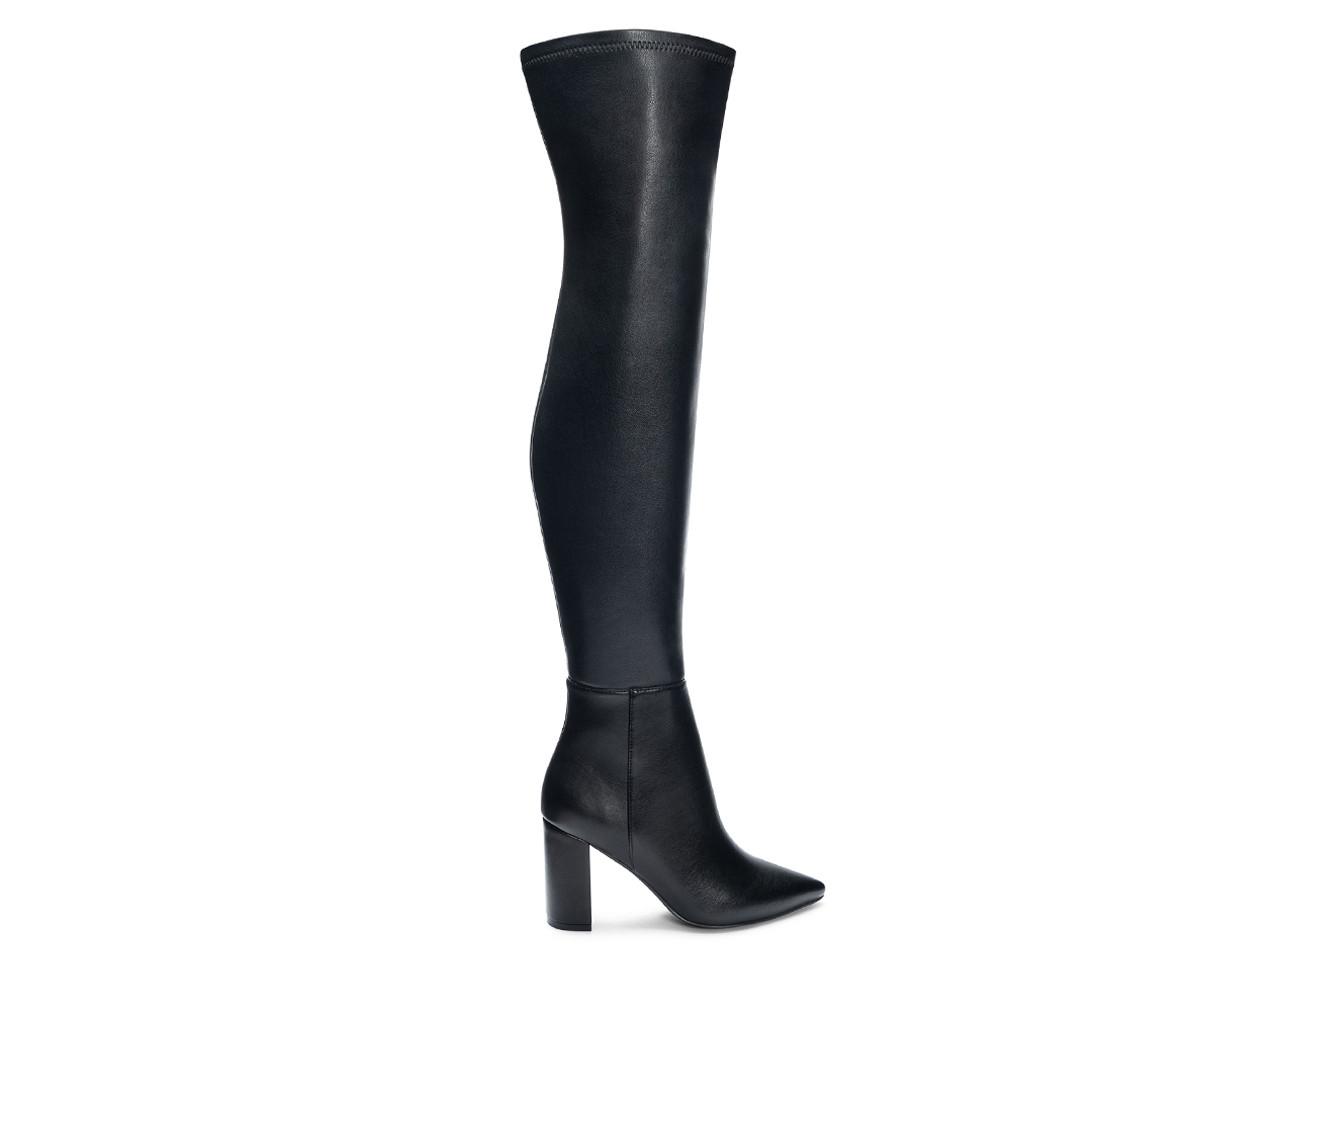 Women's Chinese Laundry Fun Times Over The Knee Heeled Boots